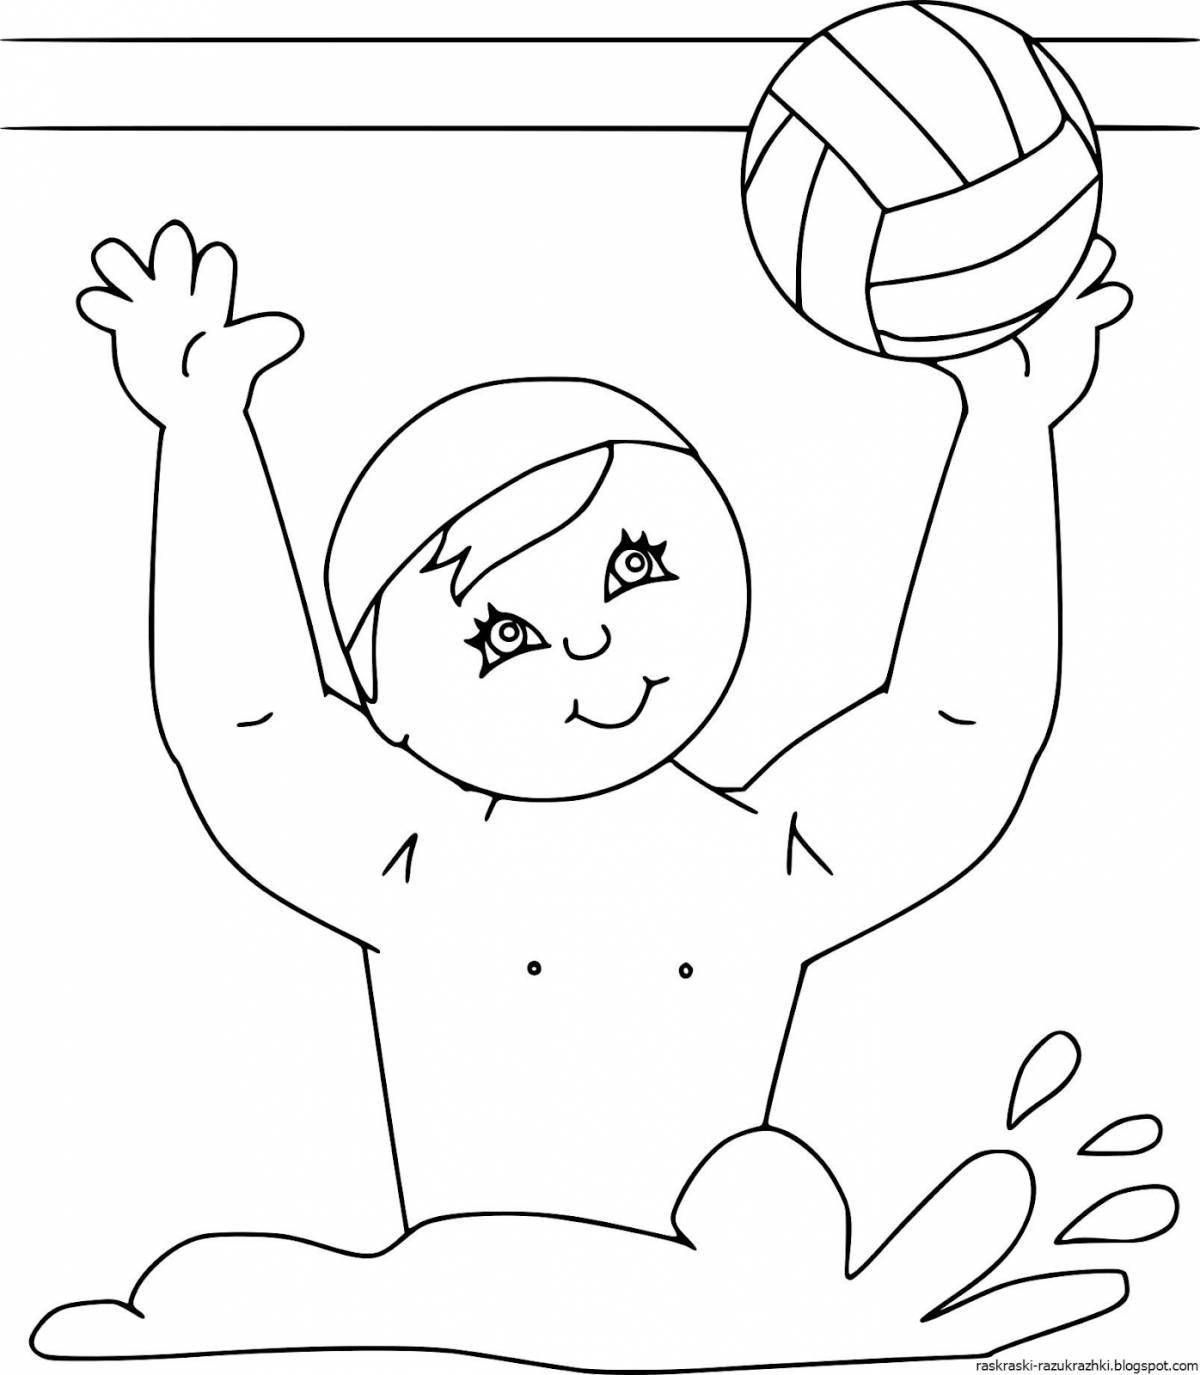 Fun sport coloring page for 4-5 year olds